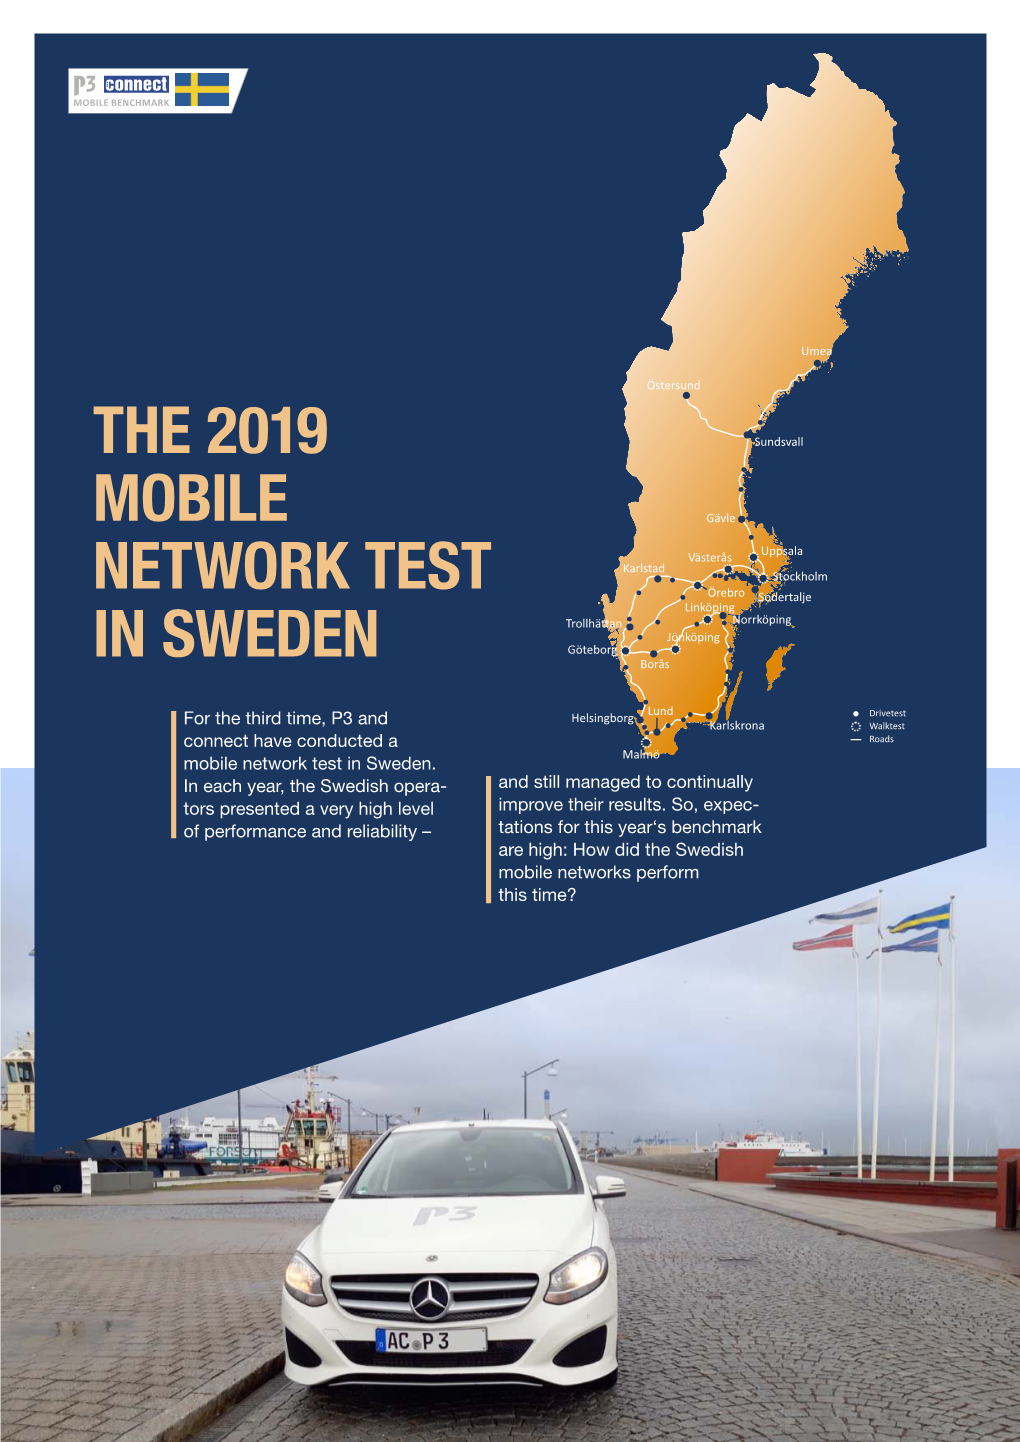 The 2019 Mobile Network Test in Sweden